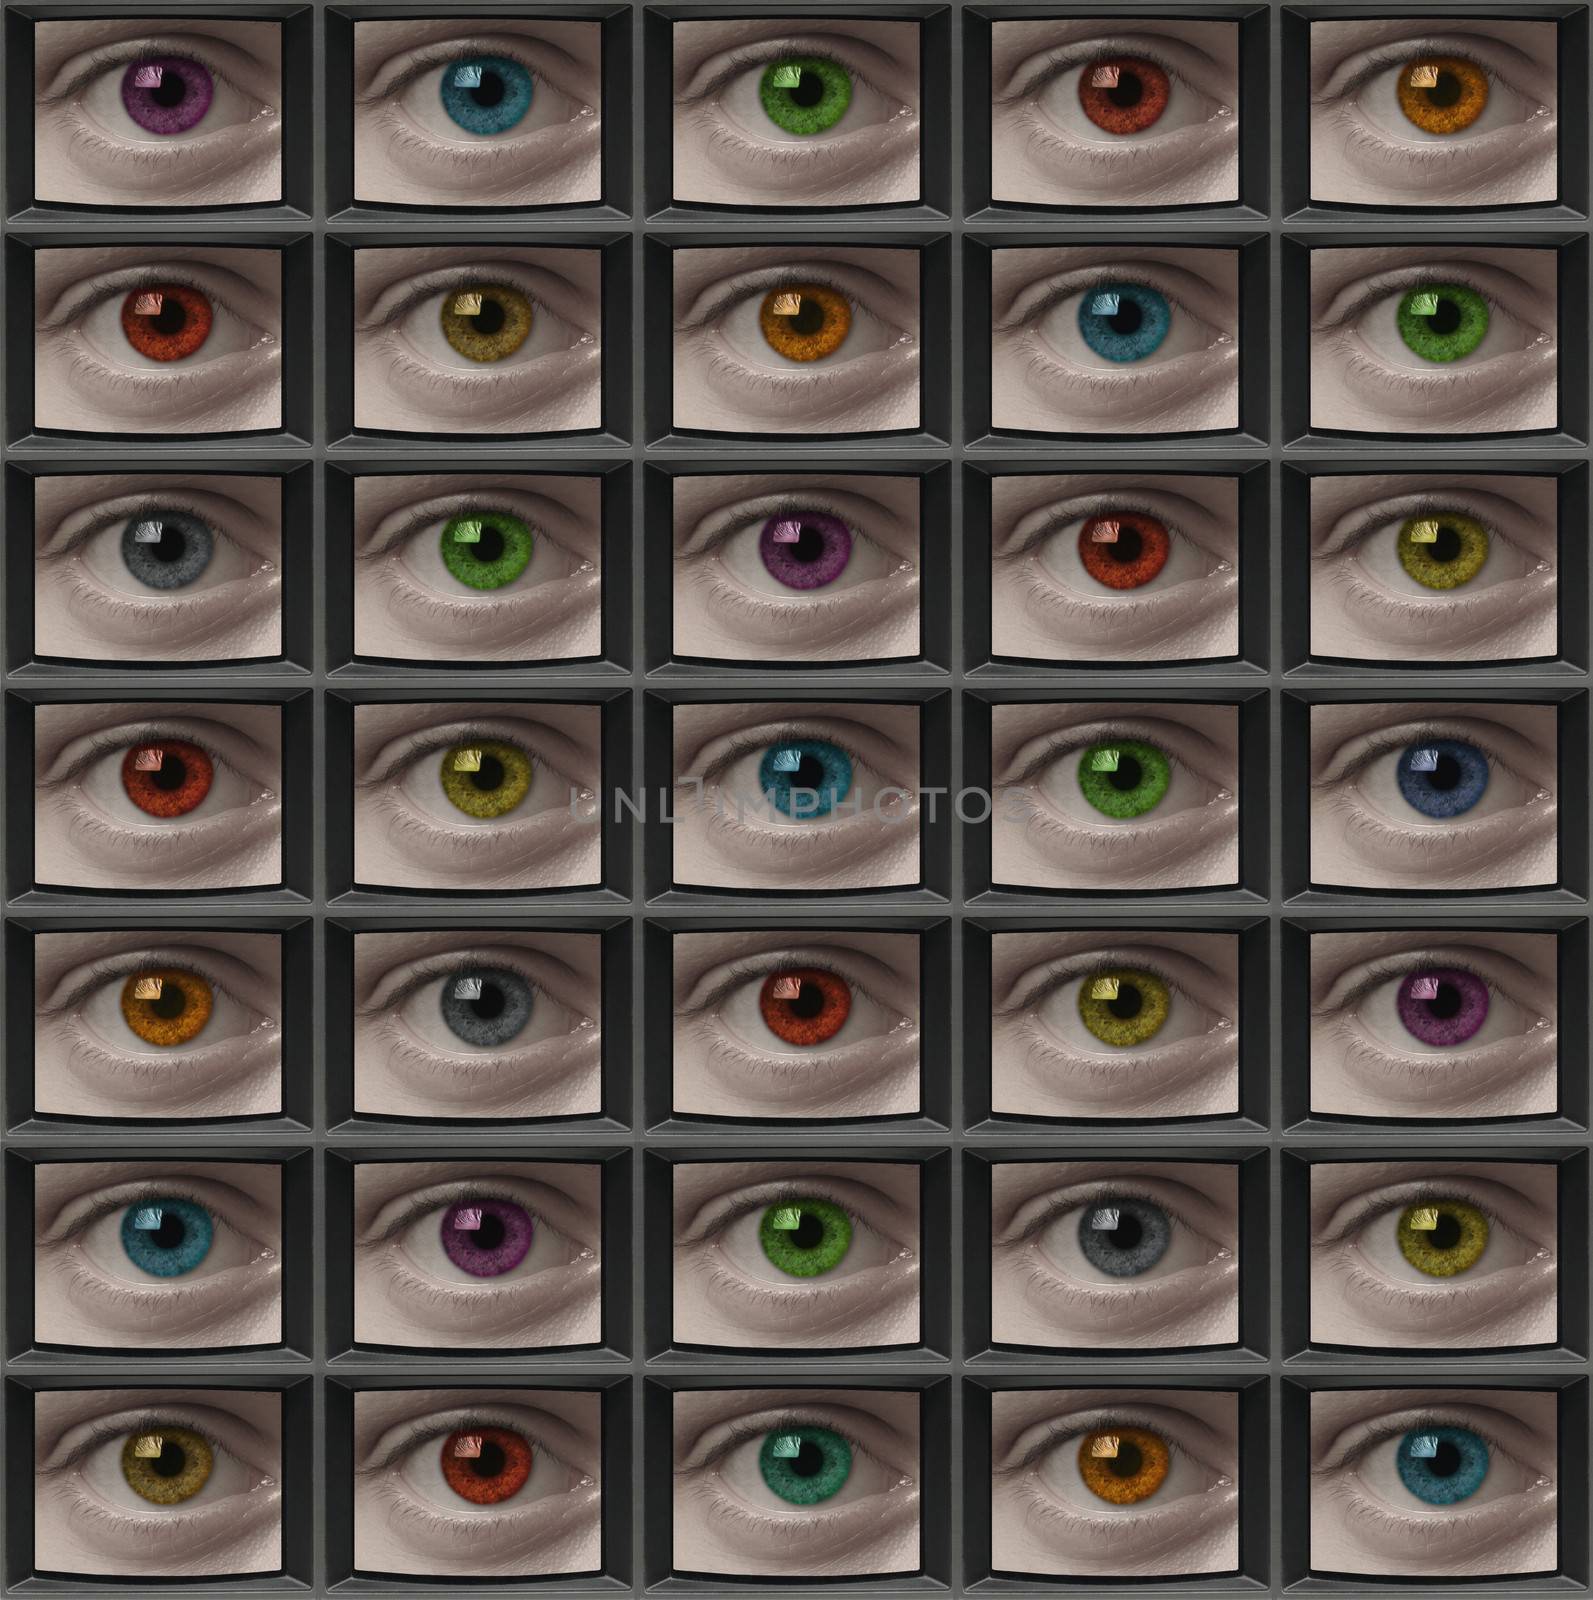 Video screens with close-ups of eyes with different color pupils